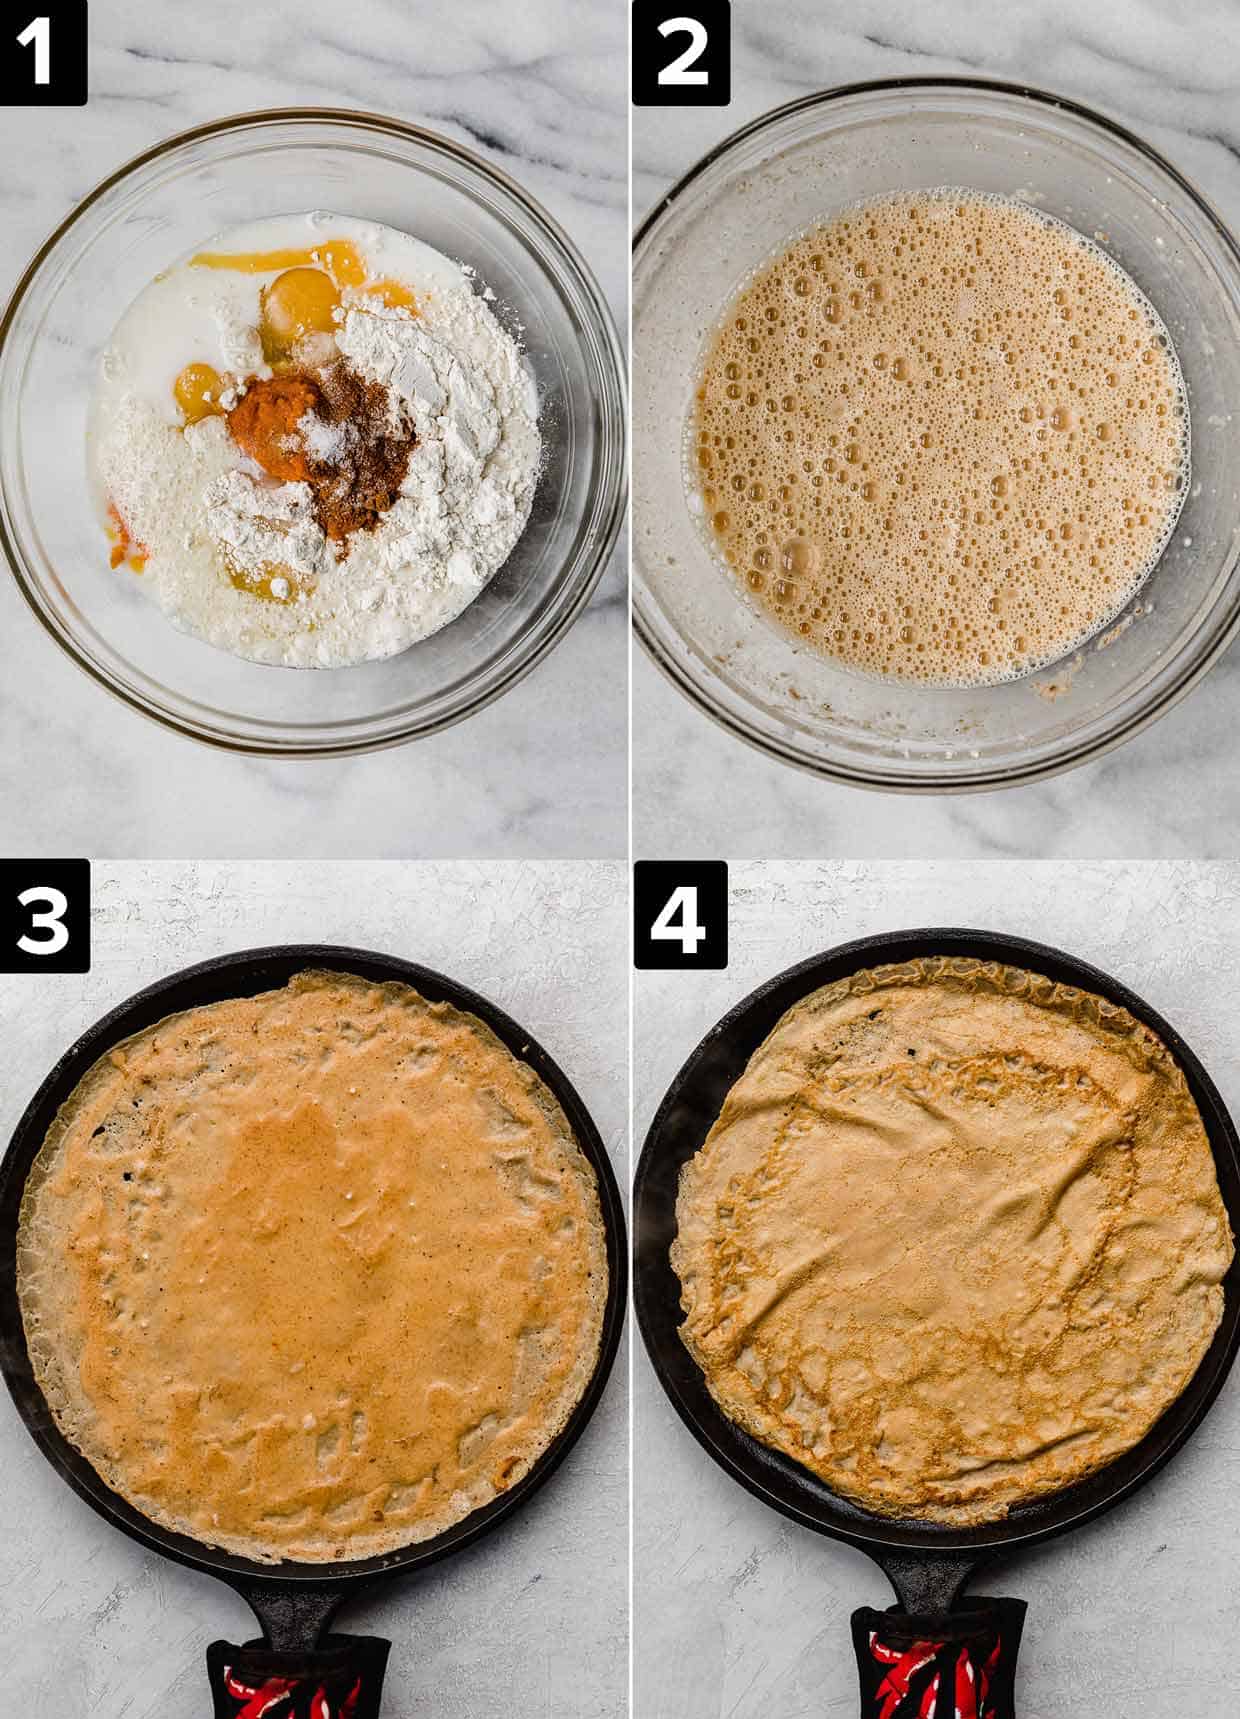 Four photos showing how to make pumpkin crepes, photos from top left to bottom right: ingredients in glass bowl, pumpkin crepe batter in glass bowl, pumpkin crepe on black skillet, golden cooked crepe on skillet.